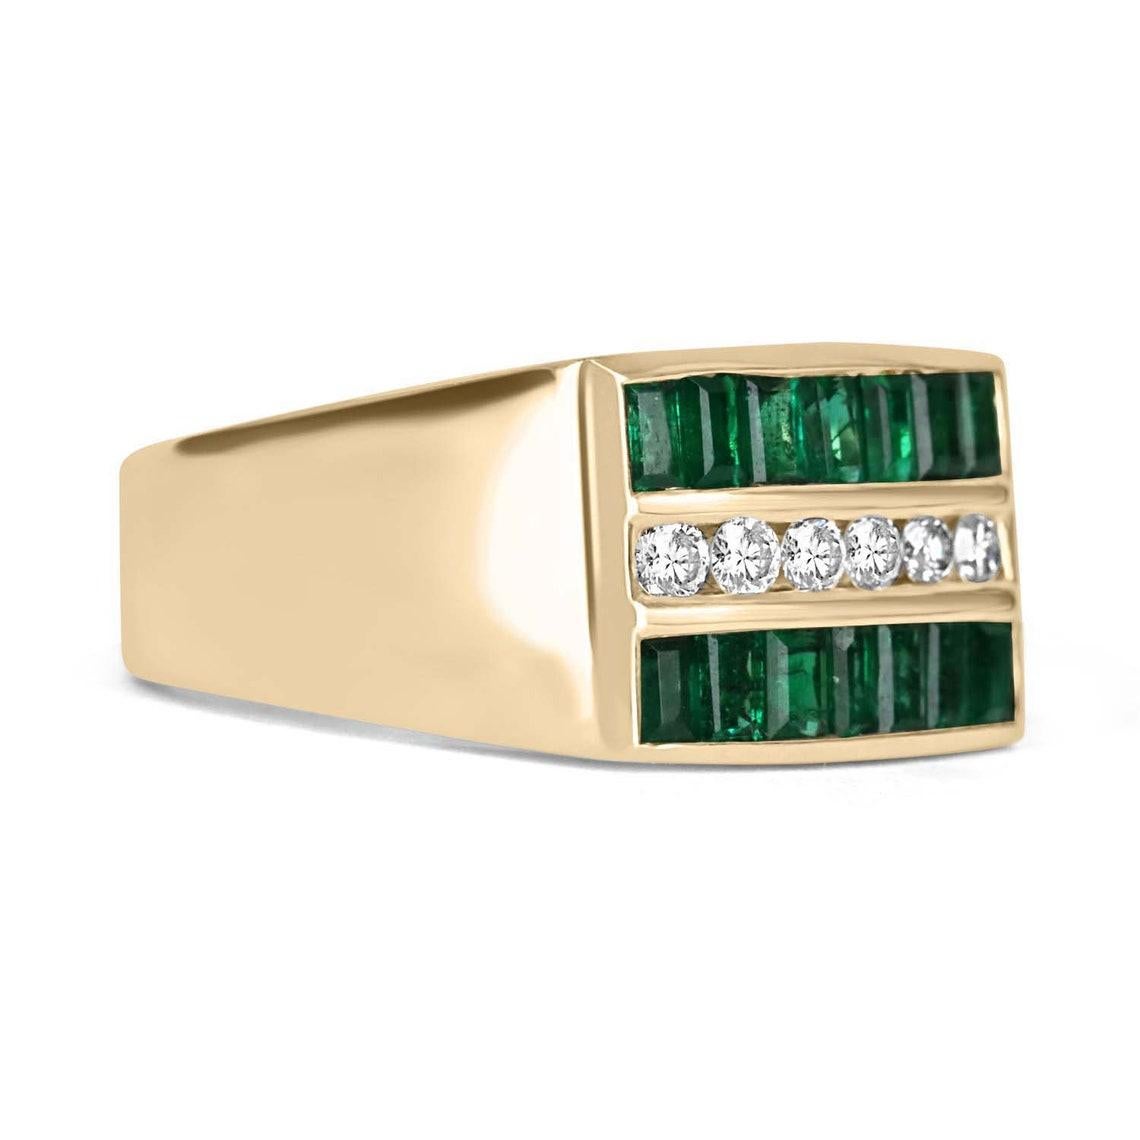 A mens' emerald and diamond channel set band. This band features natural baguette-cut emeralds and brilliant round diamonds. Each emerald has been meticulously hand-selected to ensure maximum quality. The smooth band is wide and comfortable for